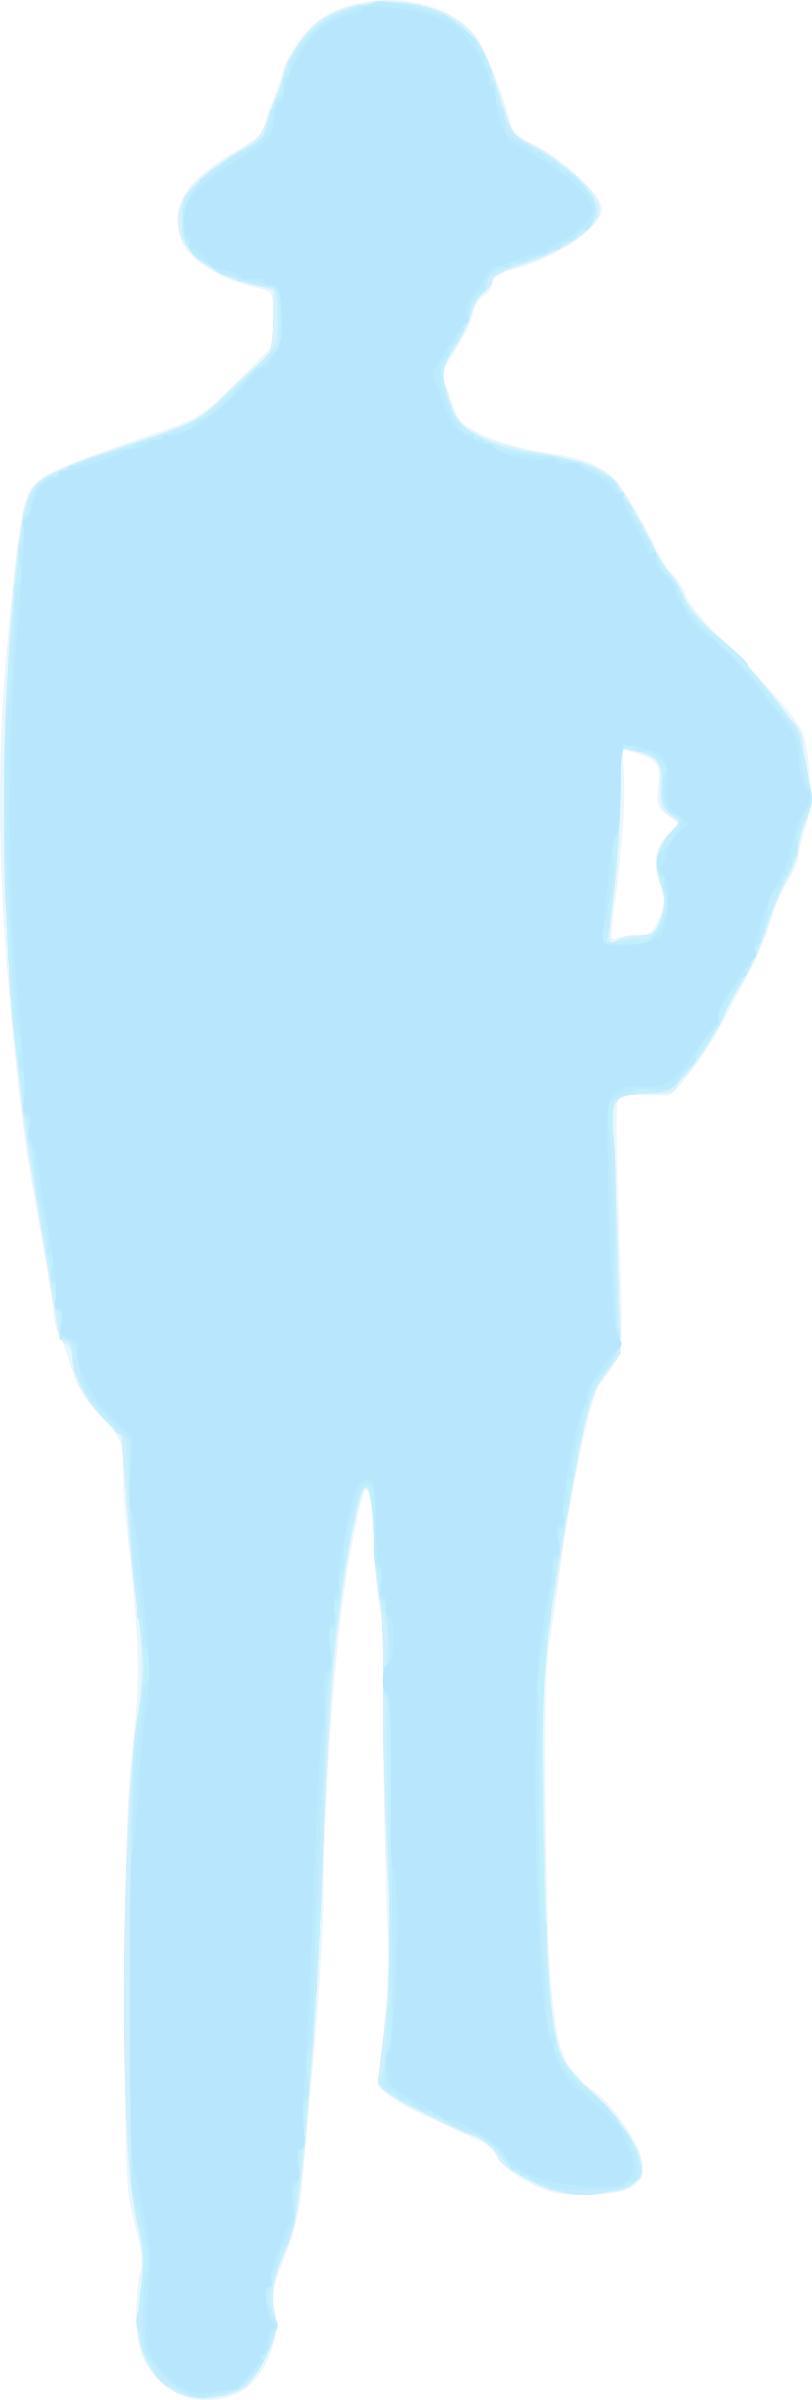 Silhouette Homme 04 png transparent